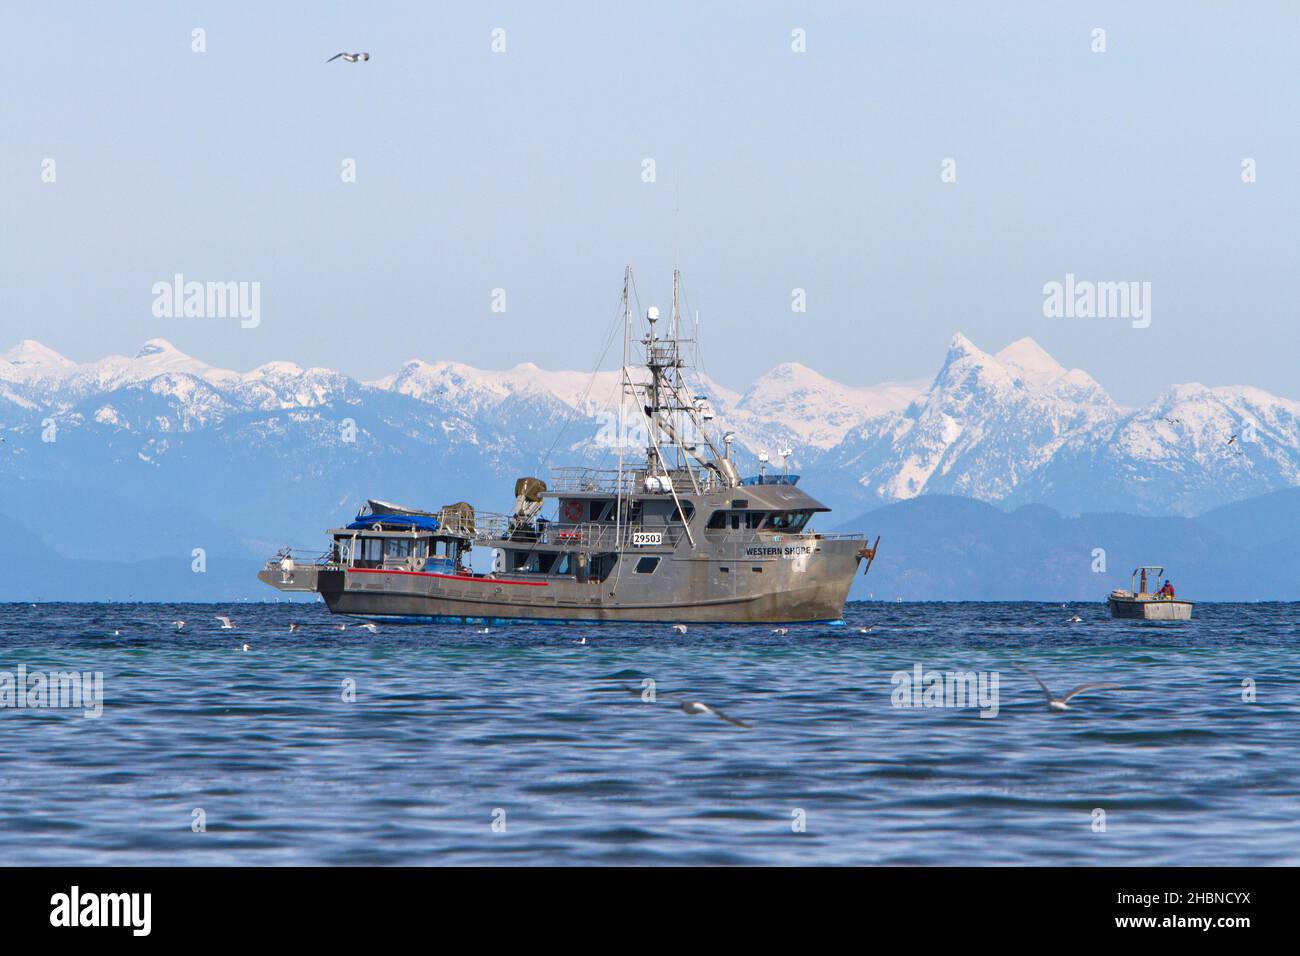 Fishing boat fishing for pacific herring in Strait of Georgia (Salish Sea) off Nanaimo coast, Vancouver Island, BC, Canada in March Stock Photo